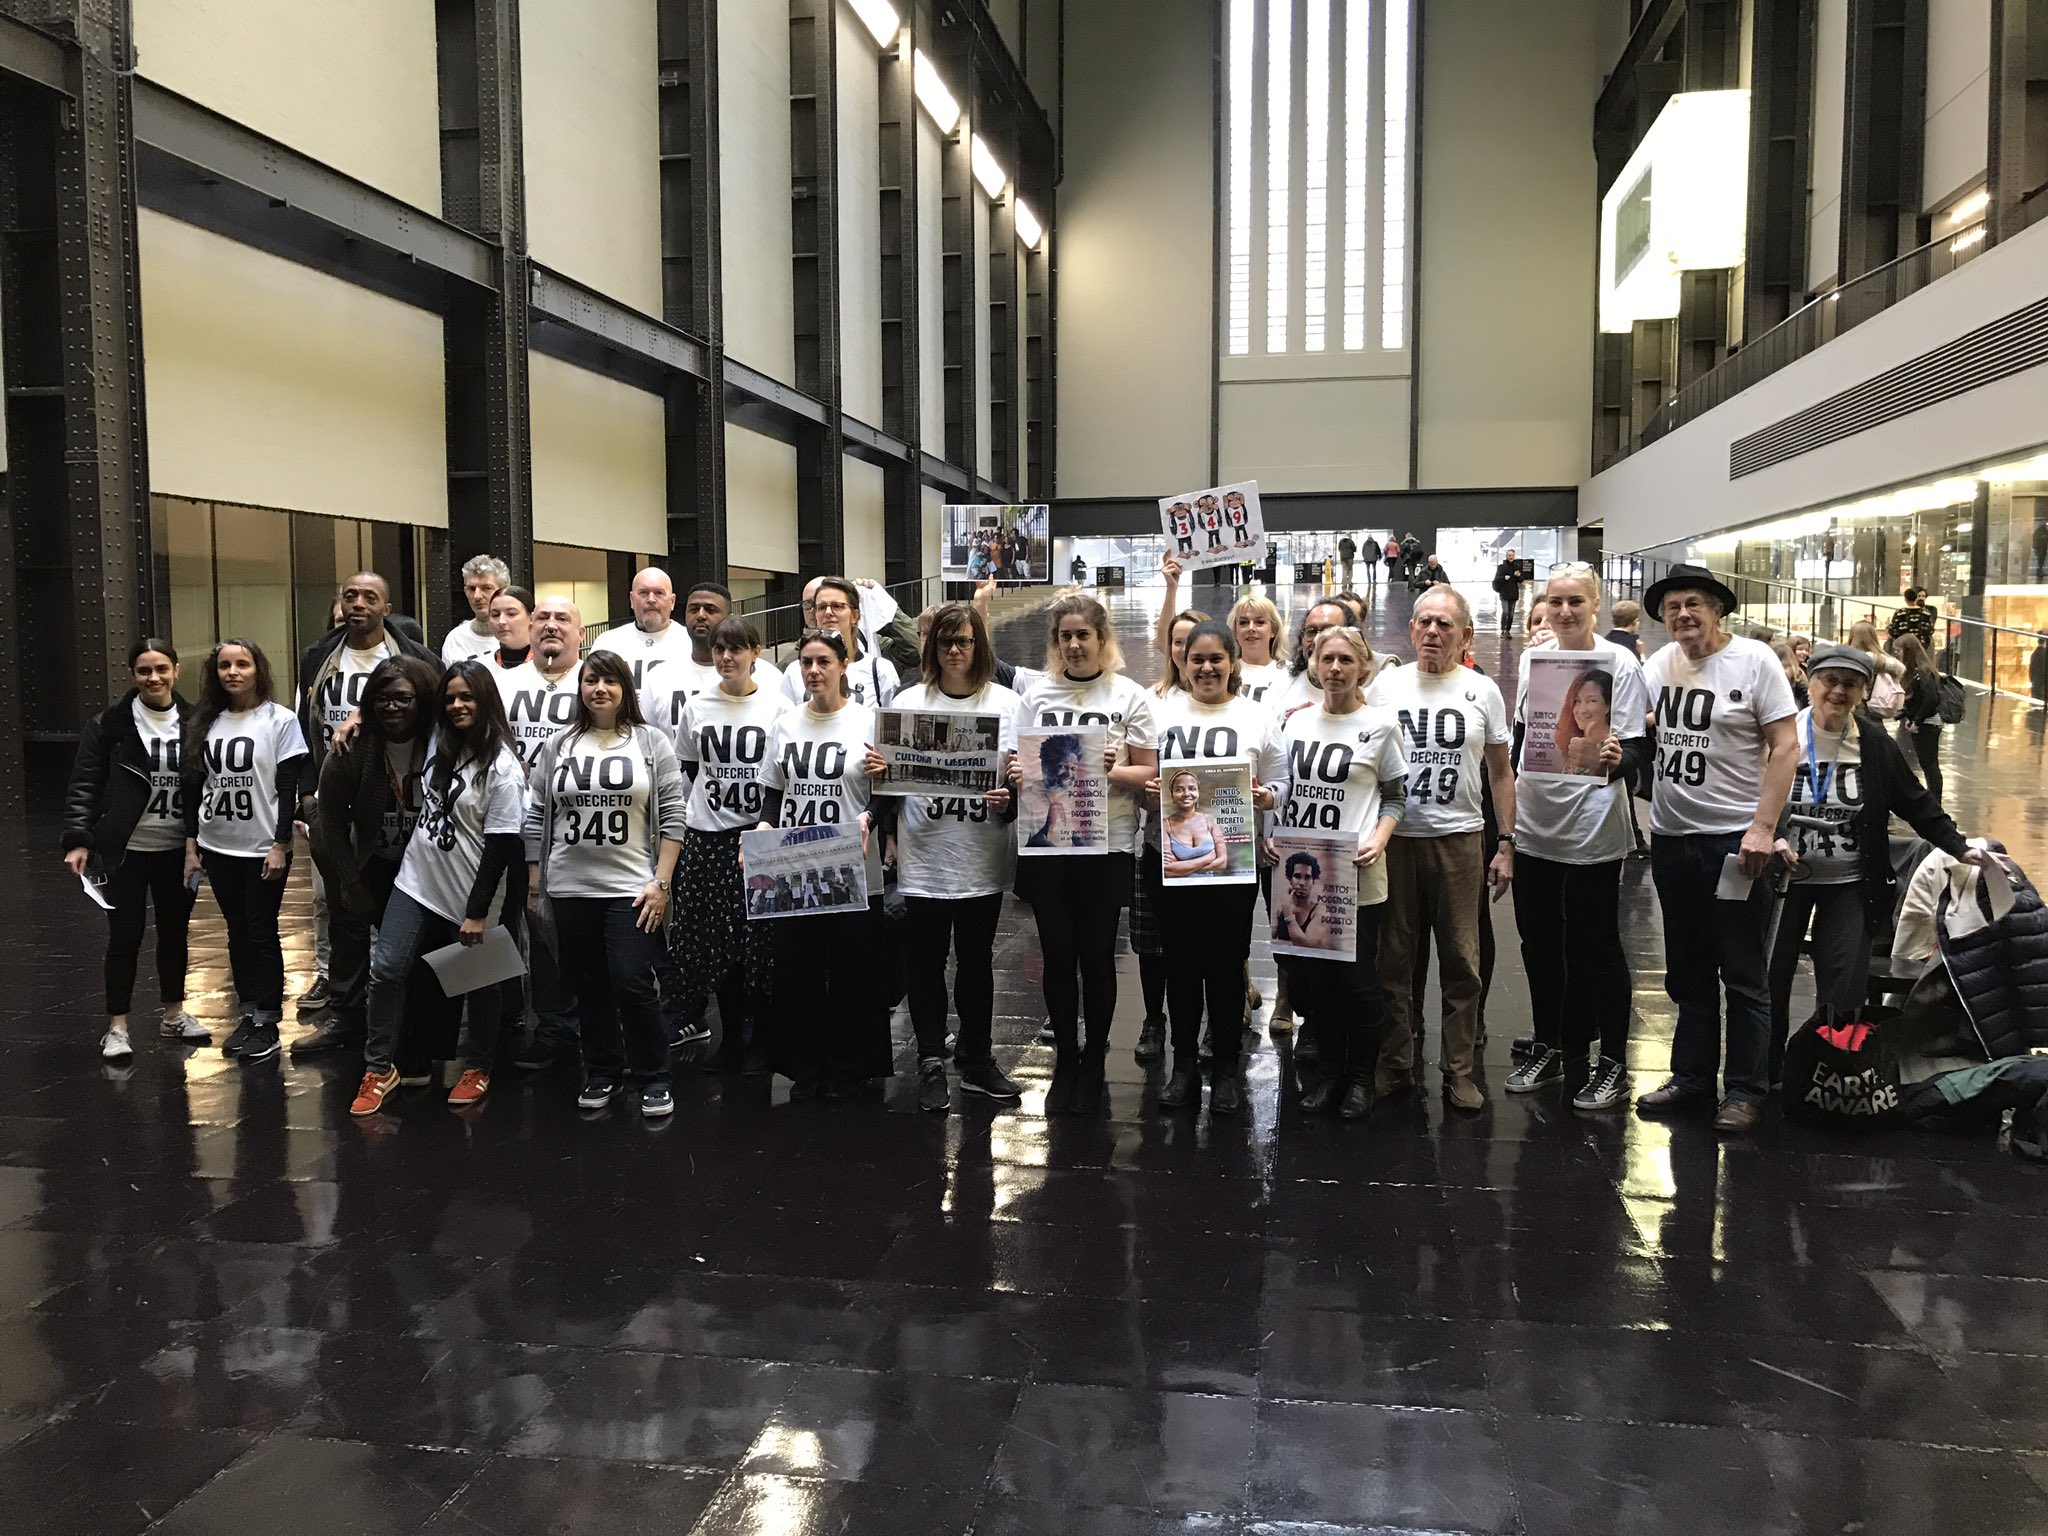 Protest in support of jailed Cuban artists at the Tate Modern gallery, London, October 2018.